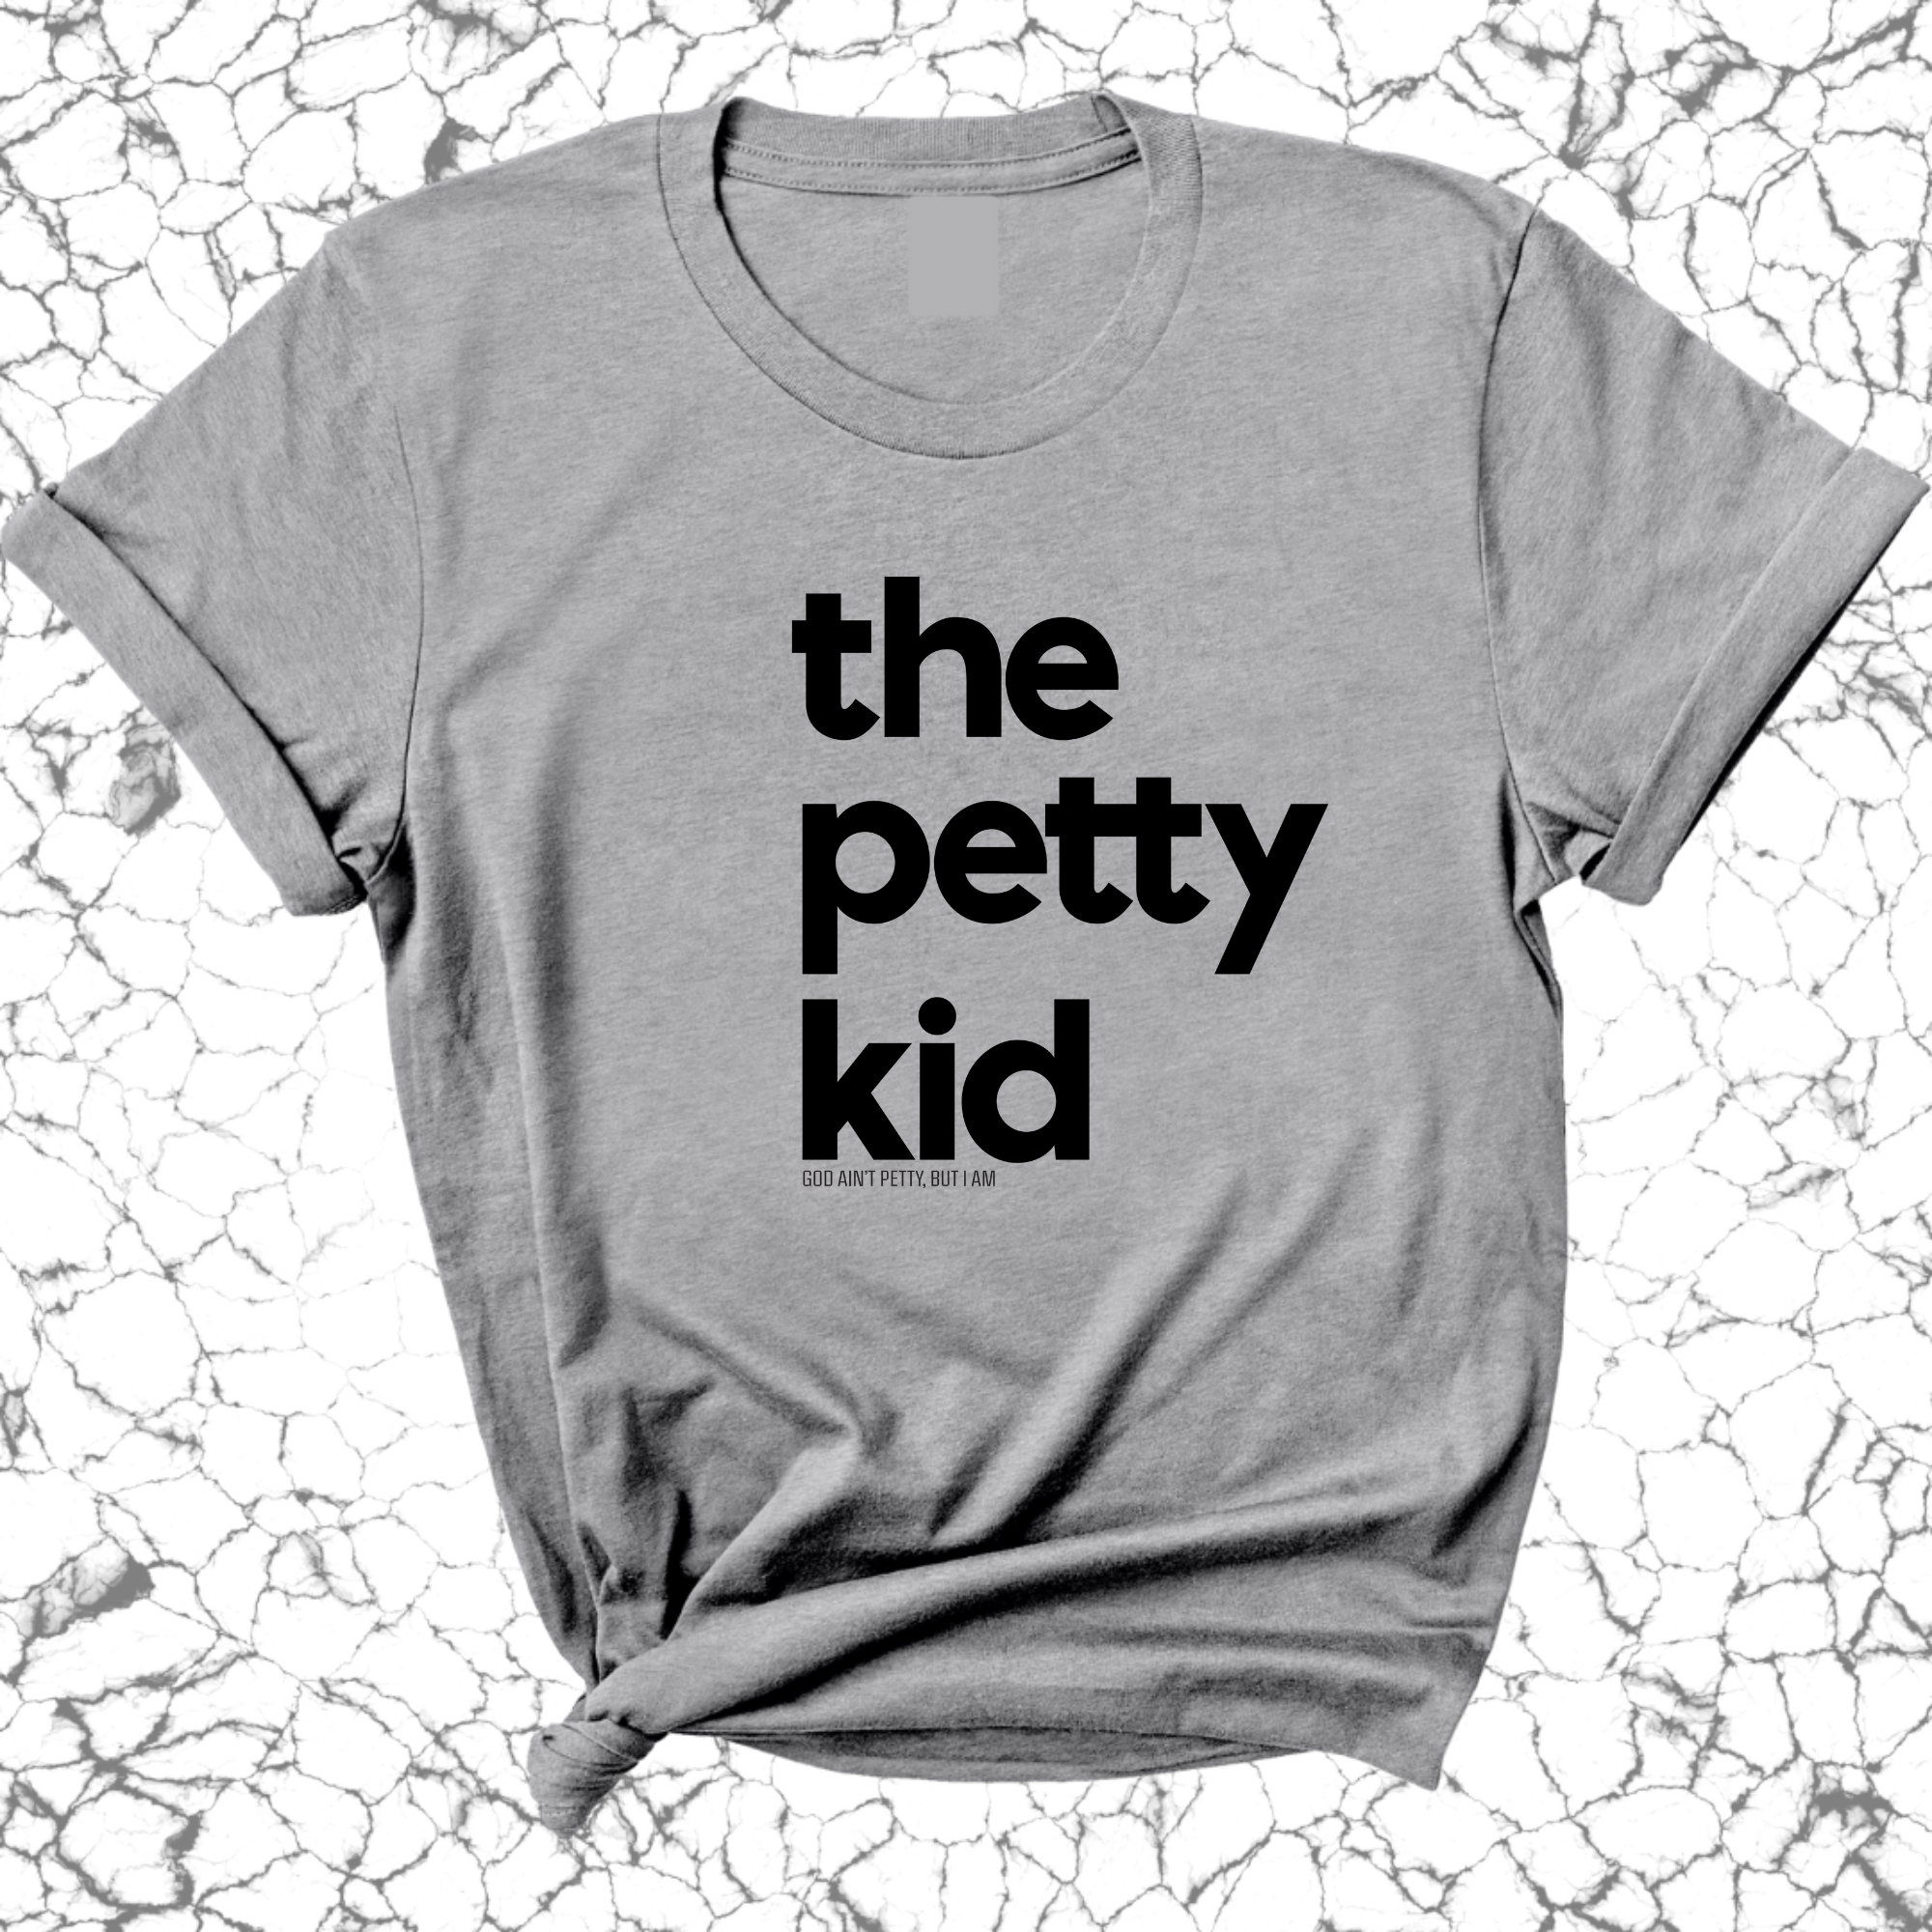 The Petty Kid Unisex Tee (adult size)-T-Shirt-The Original God Ain't Petty But I Am